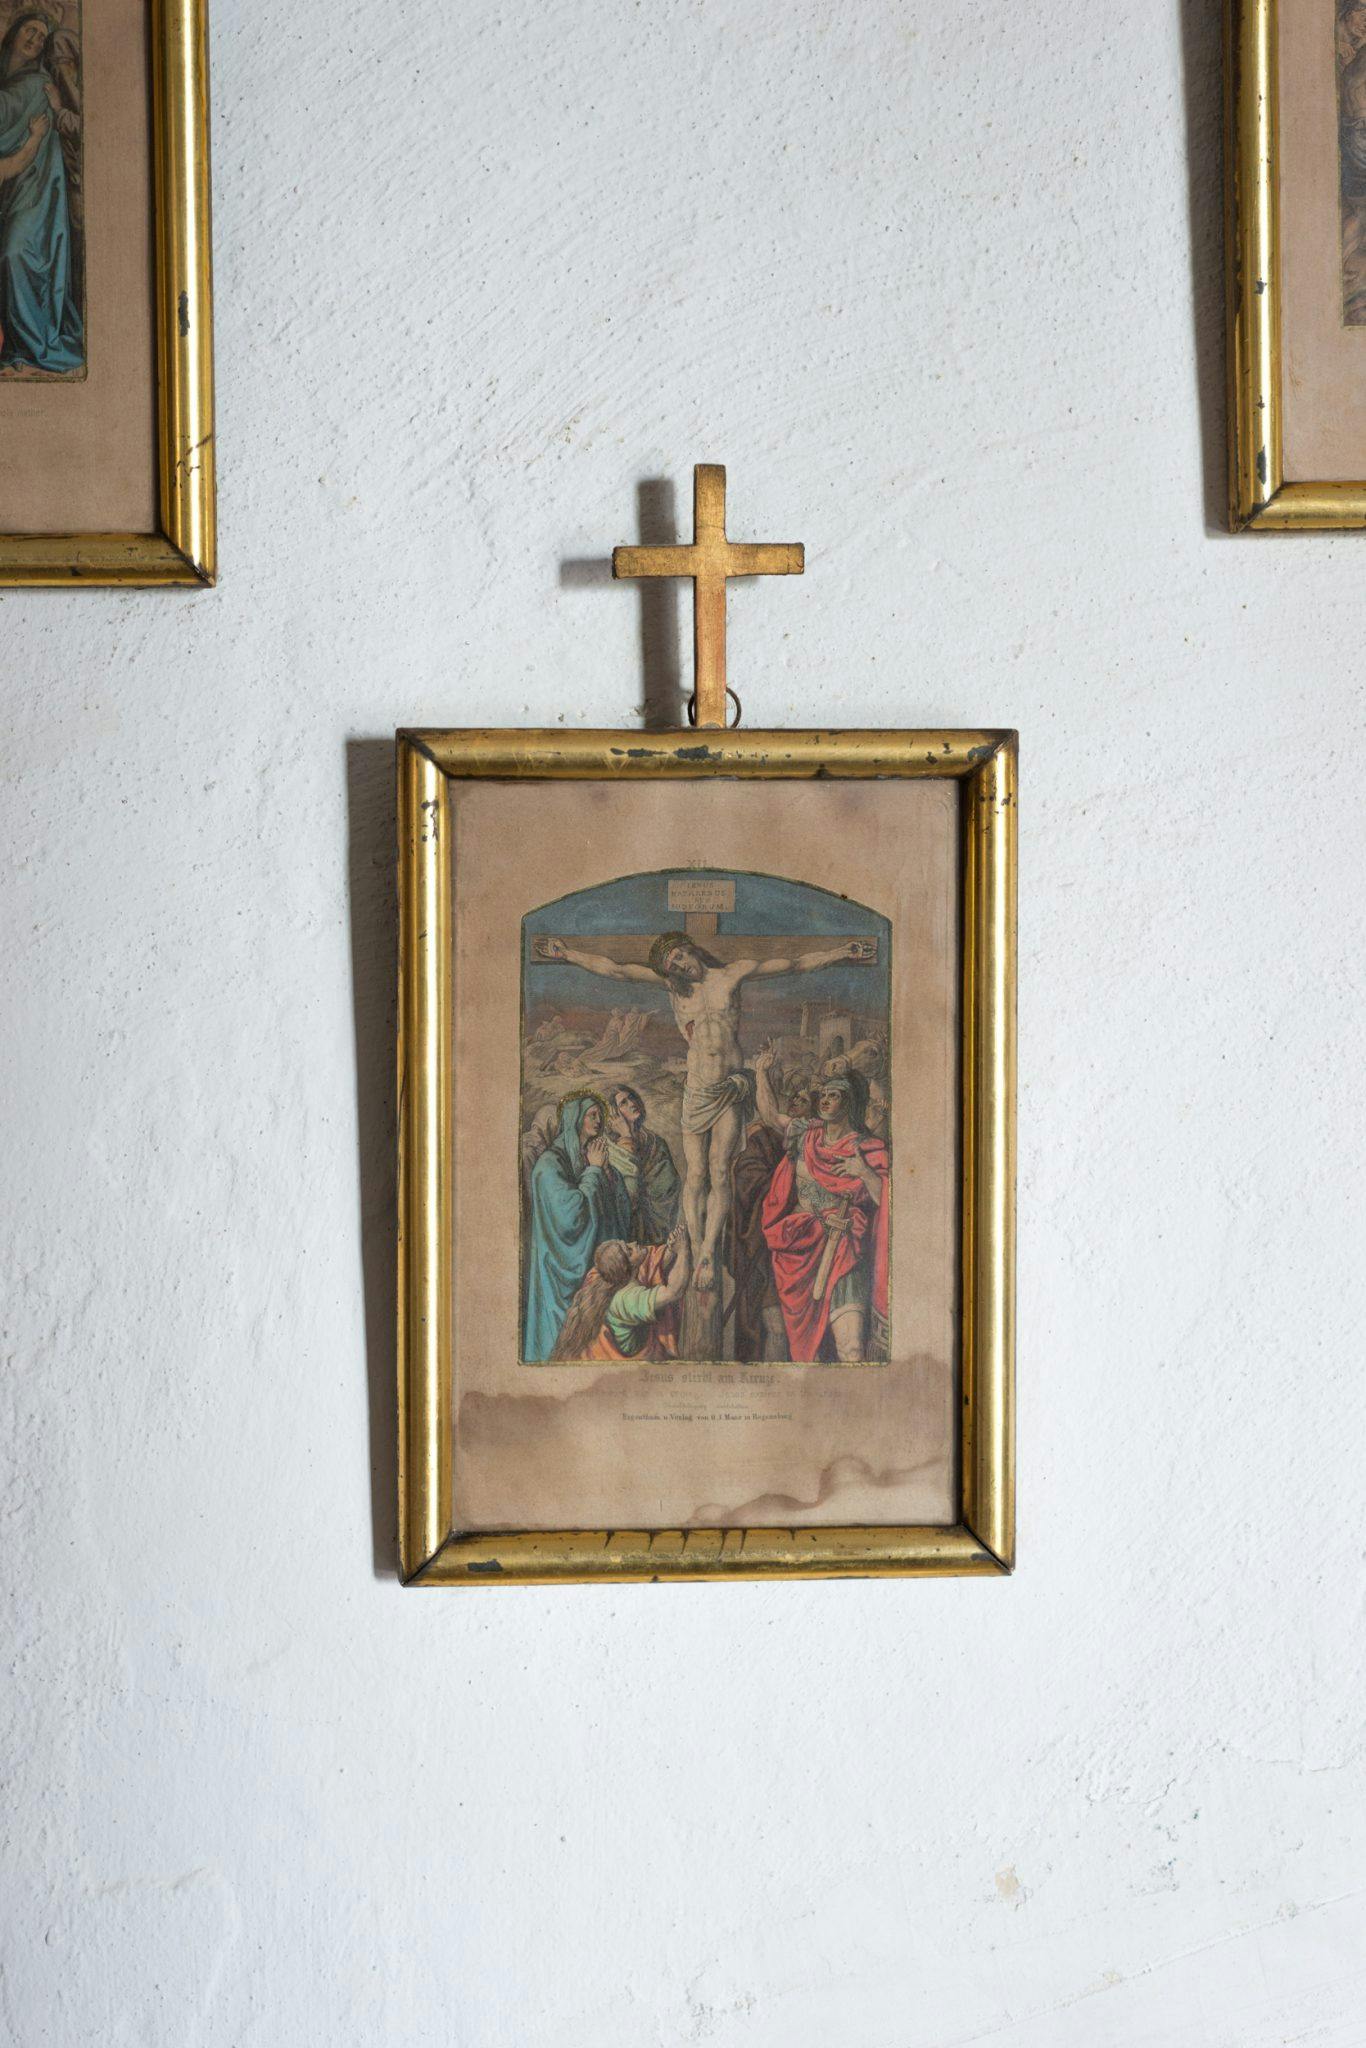 Antique painting hanging on the wall, surmounted by a cross